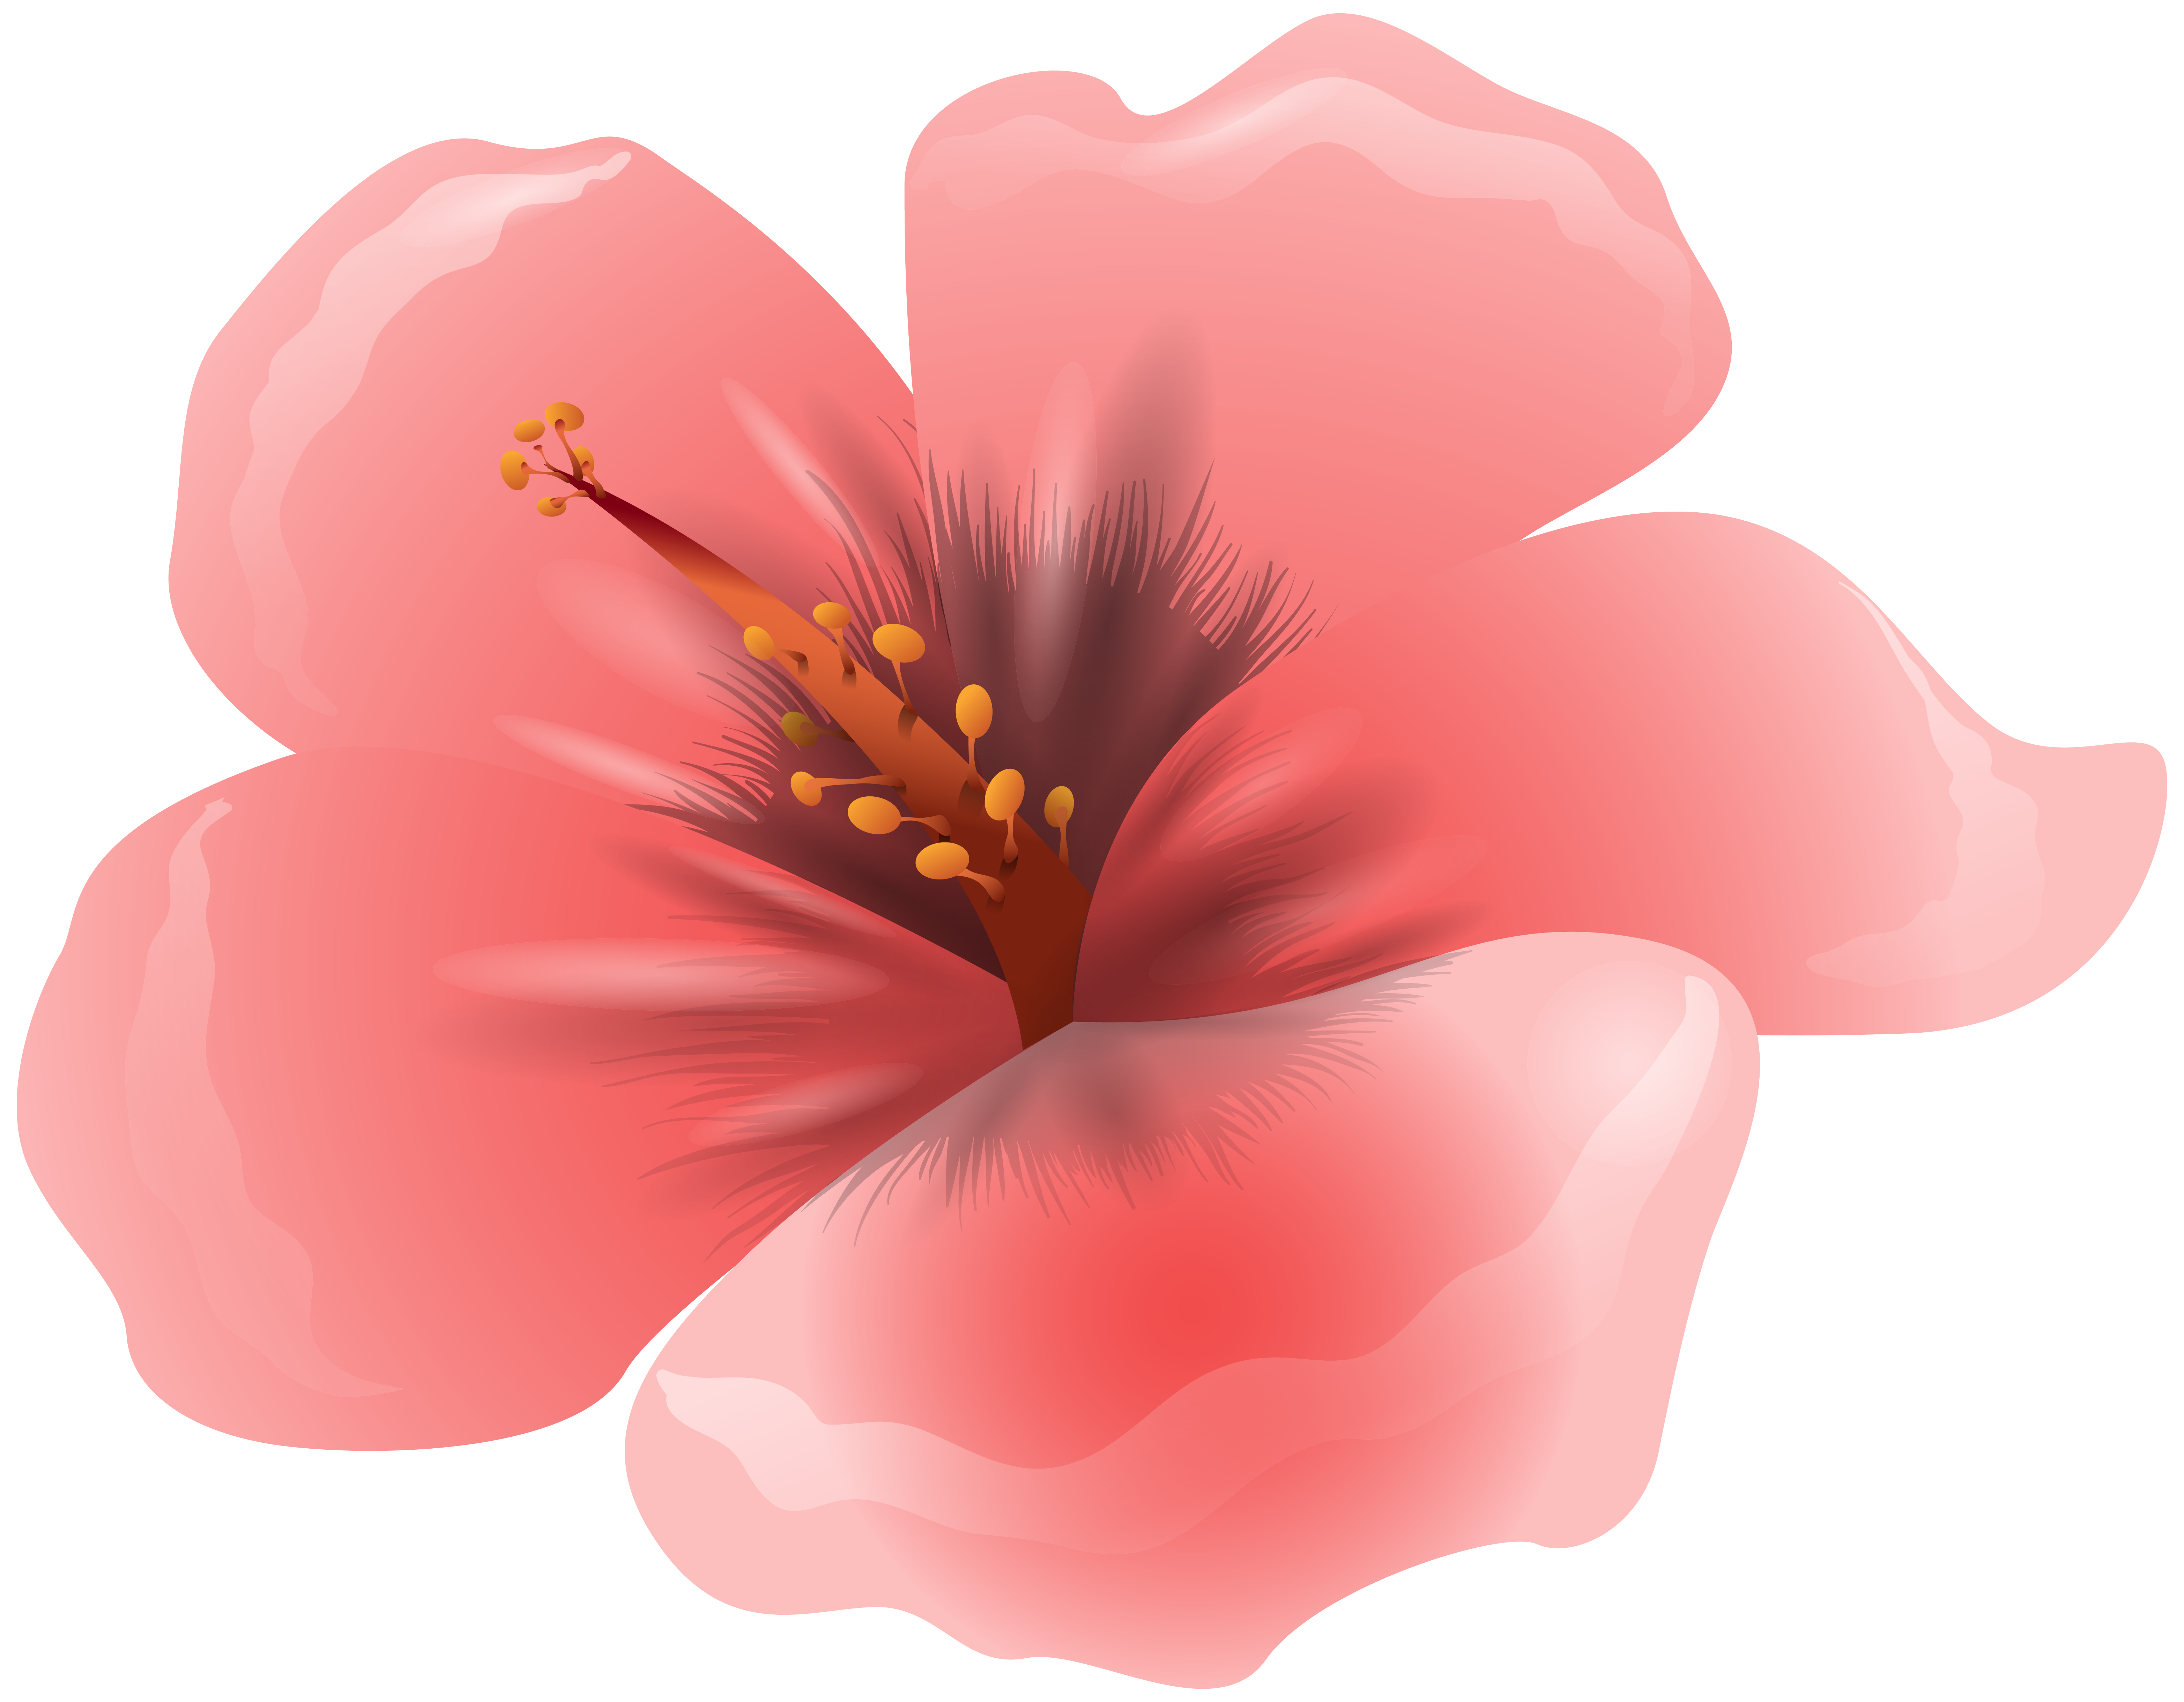 Large Pink Flower Clipart PNG Image.